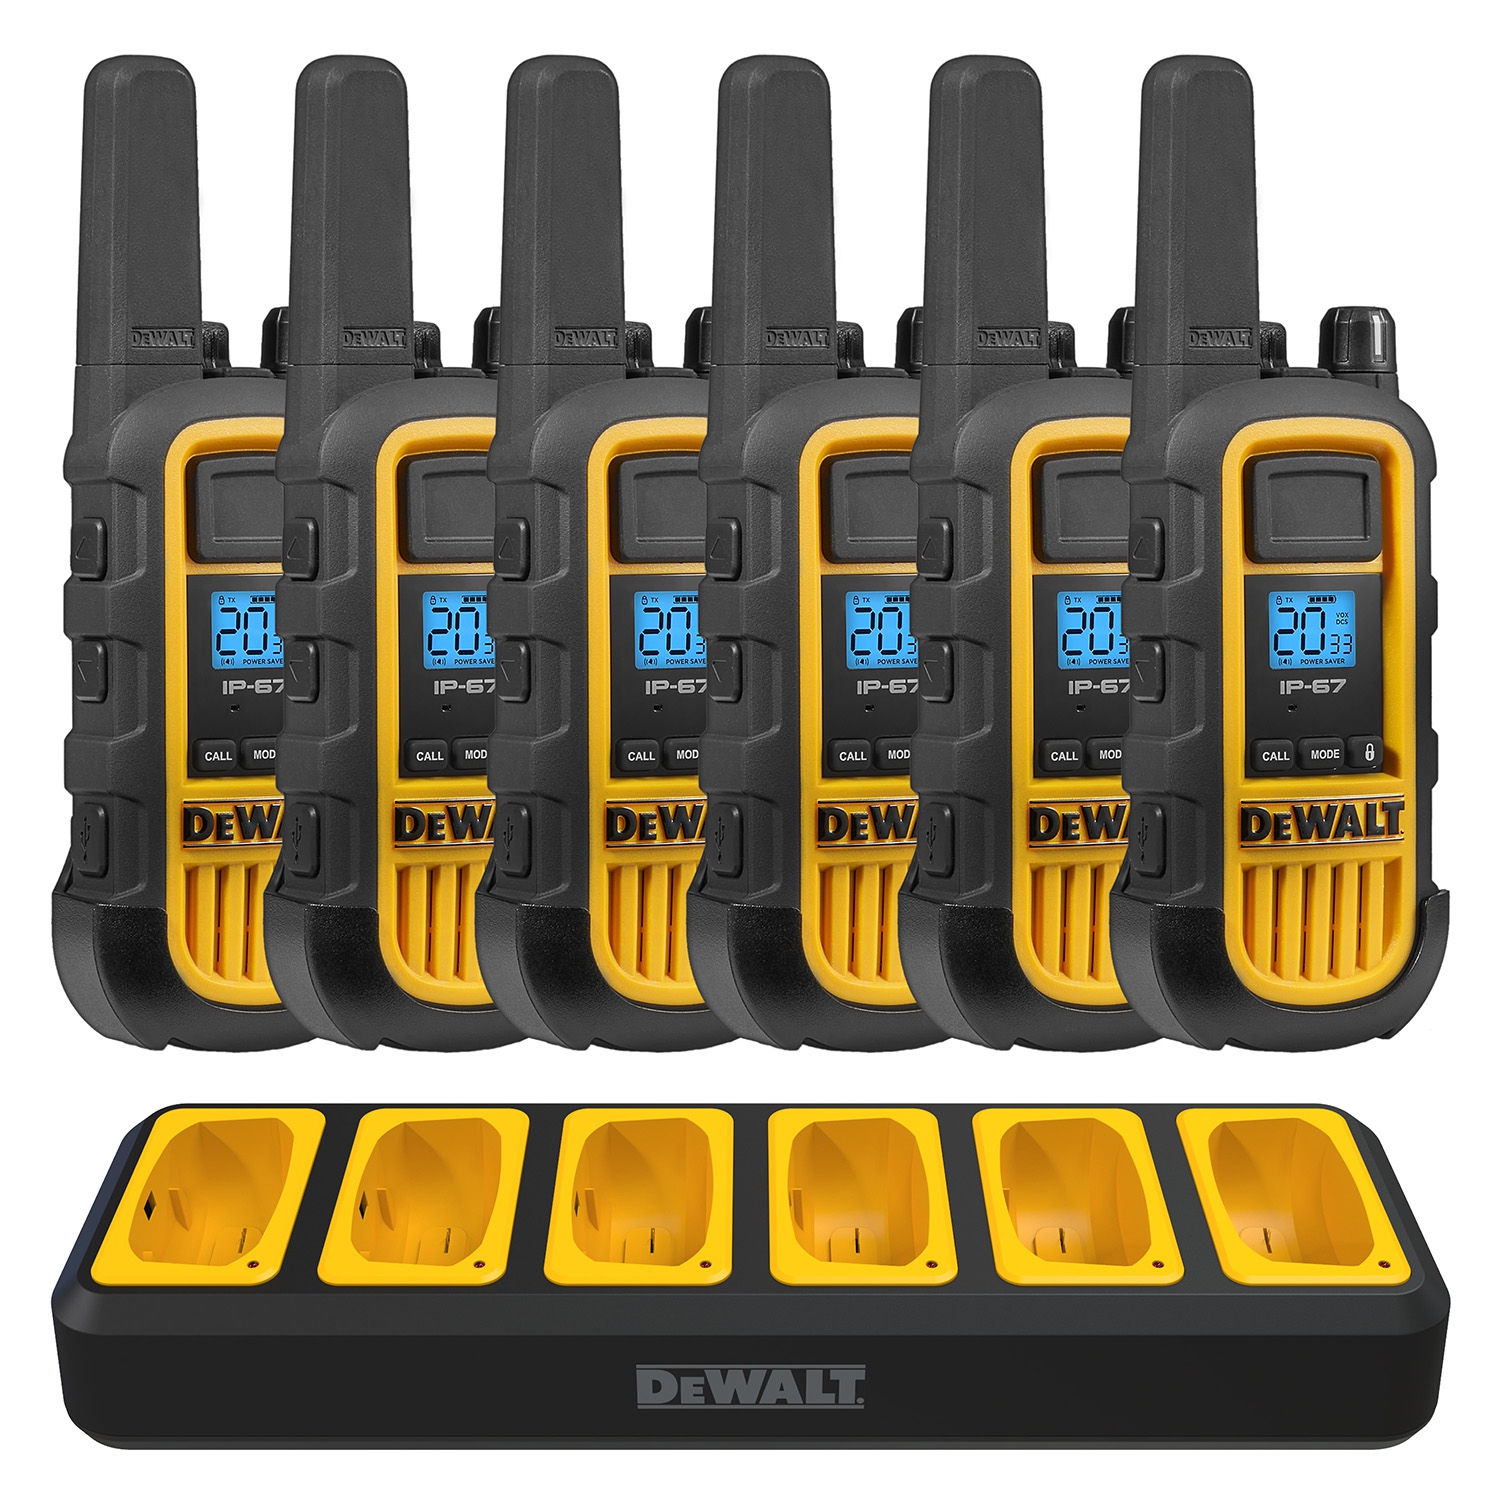 DeWalt DXFRS800-BCH6 B (7096160) Heavy Duty 6 - DXFRS800 Radios with 6 Port Charger